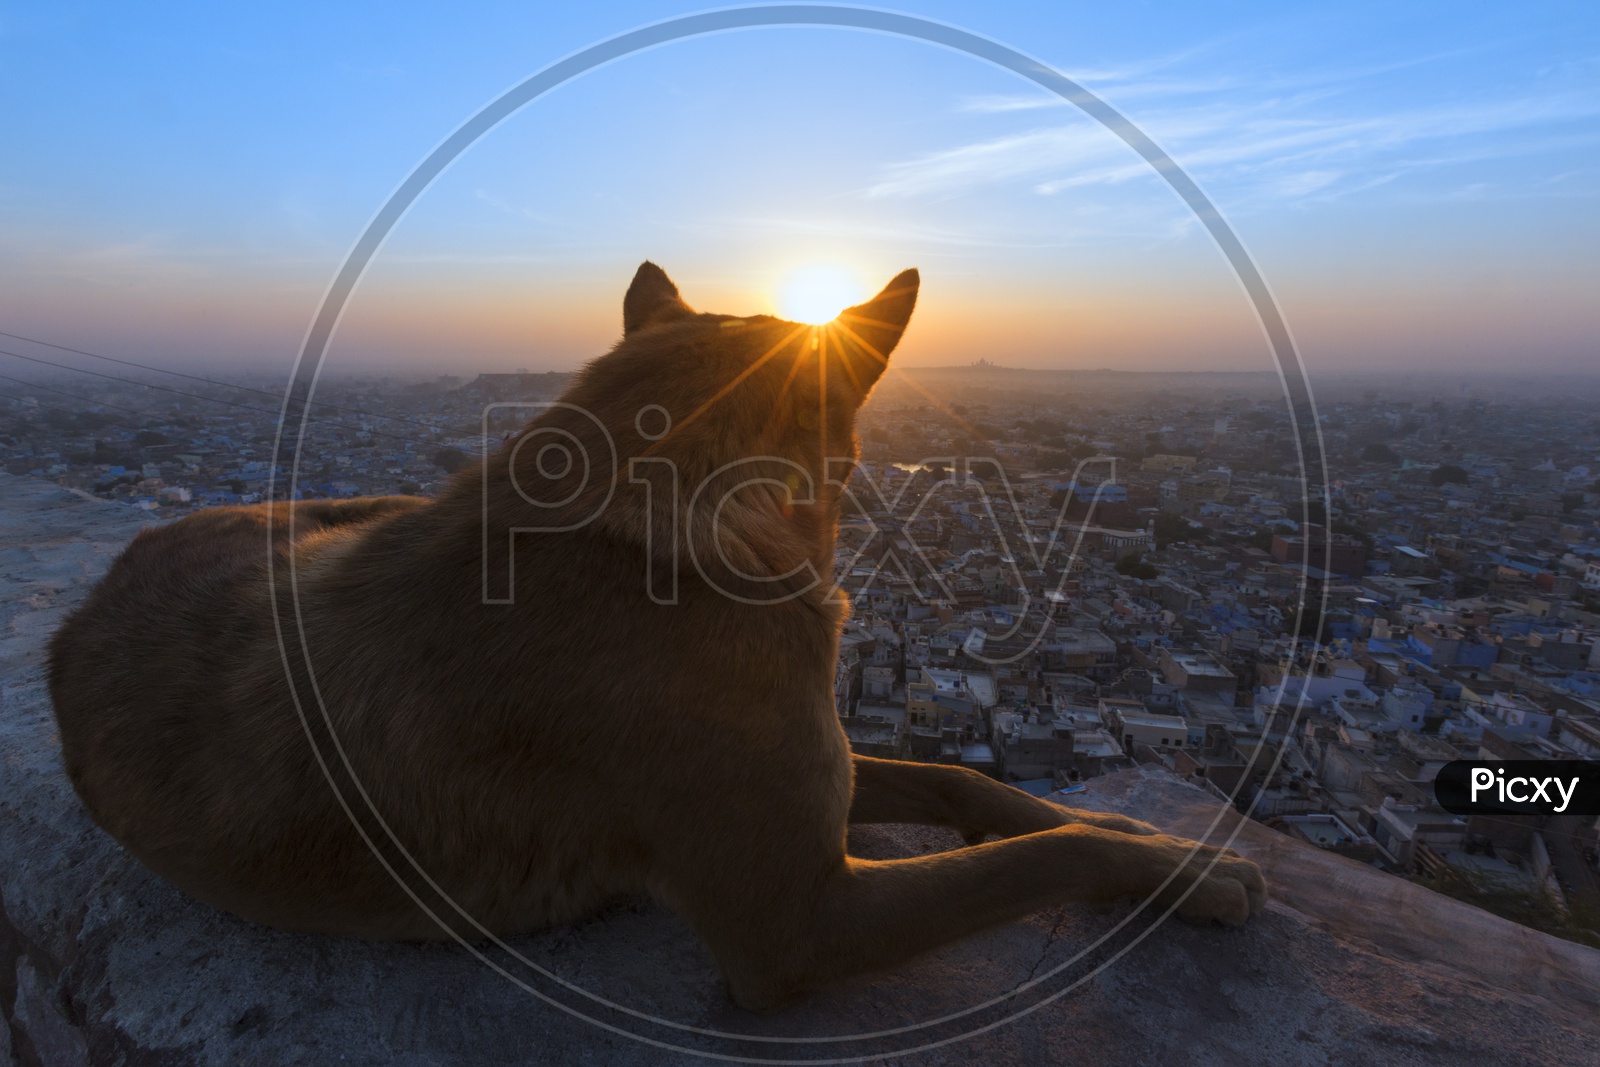 A Dog On The Walls Of Mehrangarh Fort With City View